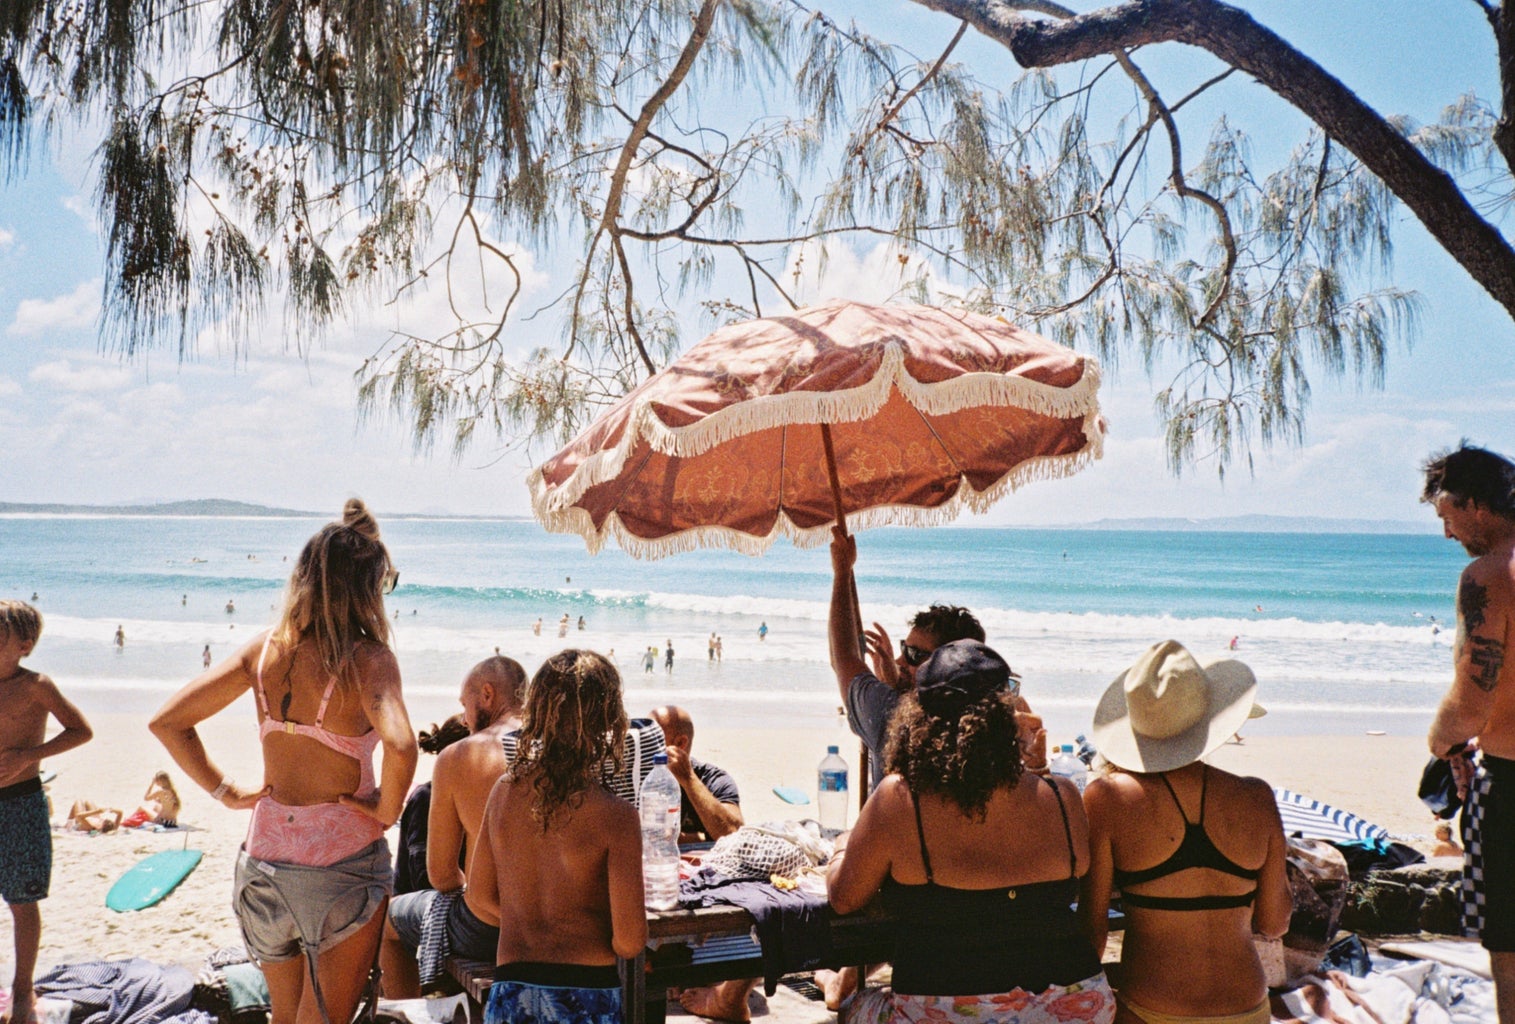 crowd of friends on a sunny beach?width=1024&height=1024&fit=cover&auto=webp